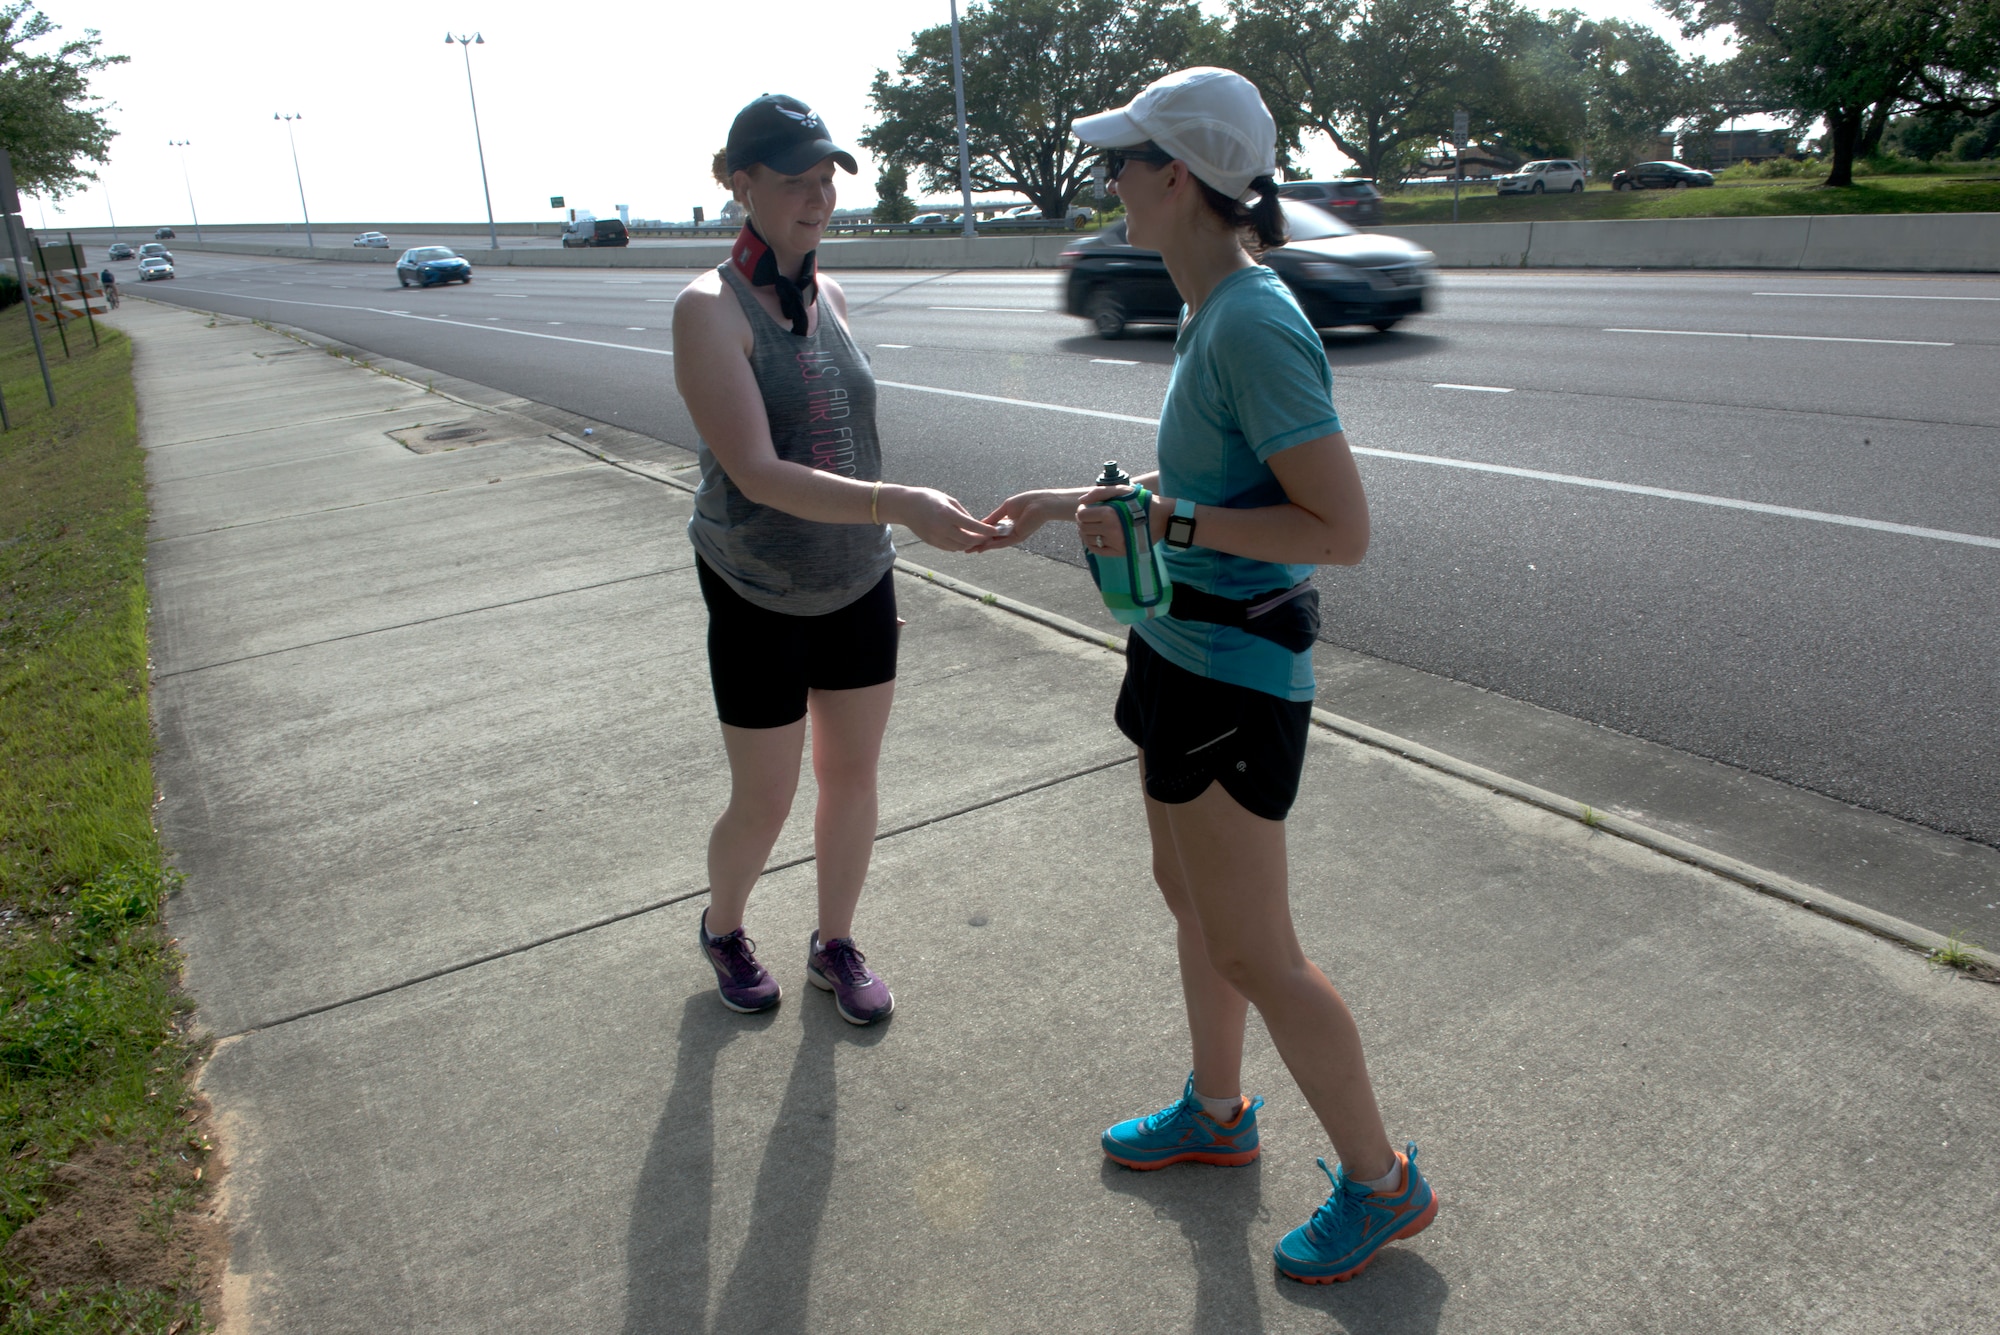 U.S. Air Force Capt. Kelly Hiser, 335th Training Squadron force support officer, hands a combat controller coin to another team member during the Crawfish Relay at Biloxi, Mississippi, May 3, 2019. The relay team, "Unicorn of the Sea," accepted the challenge of the Crawfish Relay to not only push themselves, but to honor two special tactics Airmen killed in action, U.S. Air Force Master Sgt. John Chapman and U.S. Air Force Staff Sgt. Dylan Elchin. The team carried two combat controller coins to symbolize them and handed them off at each checkpoint. (U.S. Air Force photo by Airman Seth Haddix)